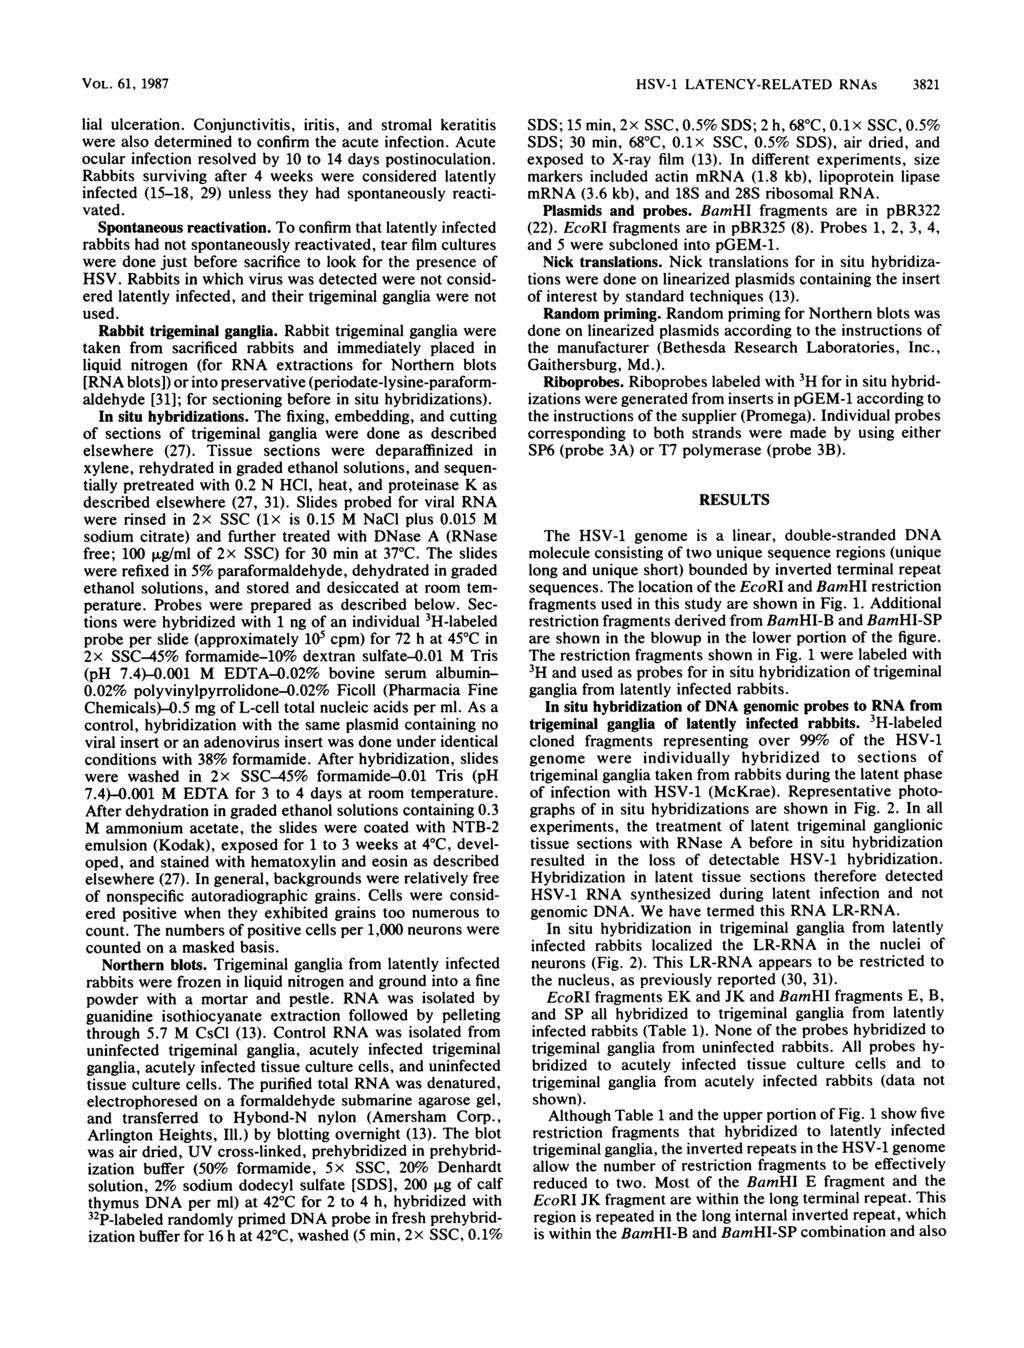 VOL. 61, 1987 lial ulceration. Conjunctivitis, iritis, and stromal keratitis were also determined to confirm the acute infection. Acute ocular infection resolved by 10 to 14 days postinoculation.